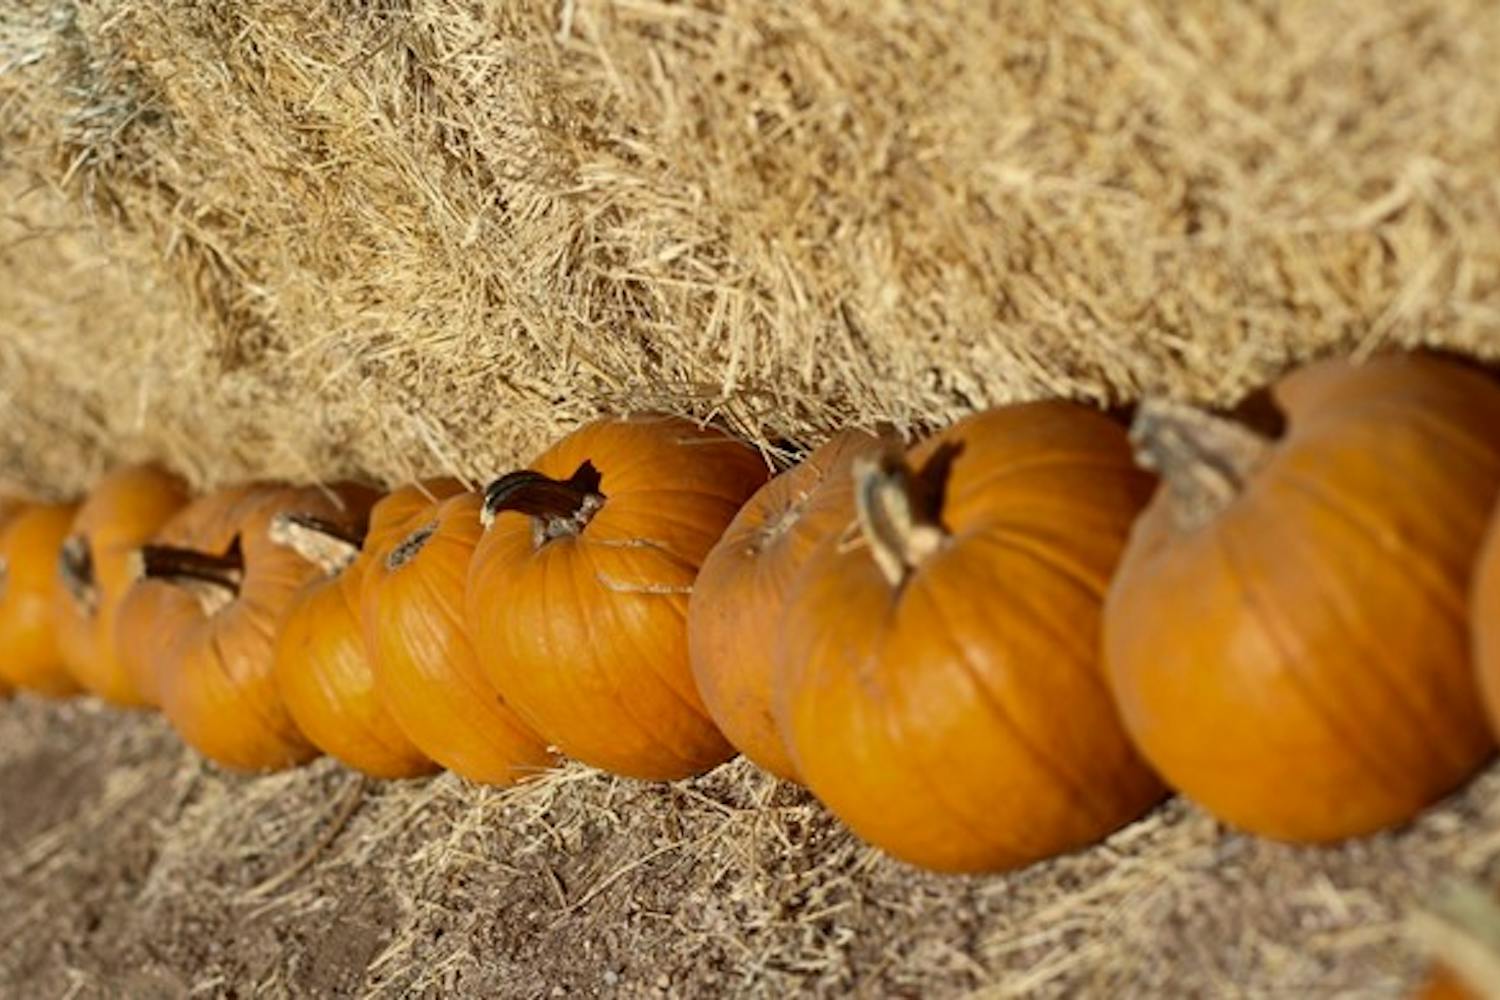 PUMPKIN ROW: Pumpkins of all sizes are lined up to be picked for Halloween at the MacDonald's Ranch Pumpkin Patch in Cave Creek. (Photo by Lisa Bartoli)